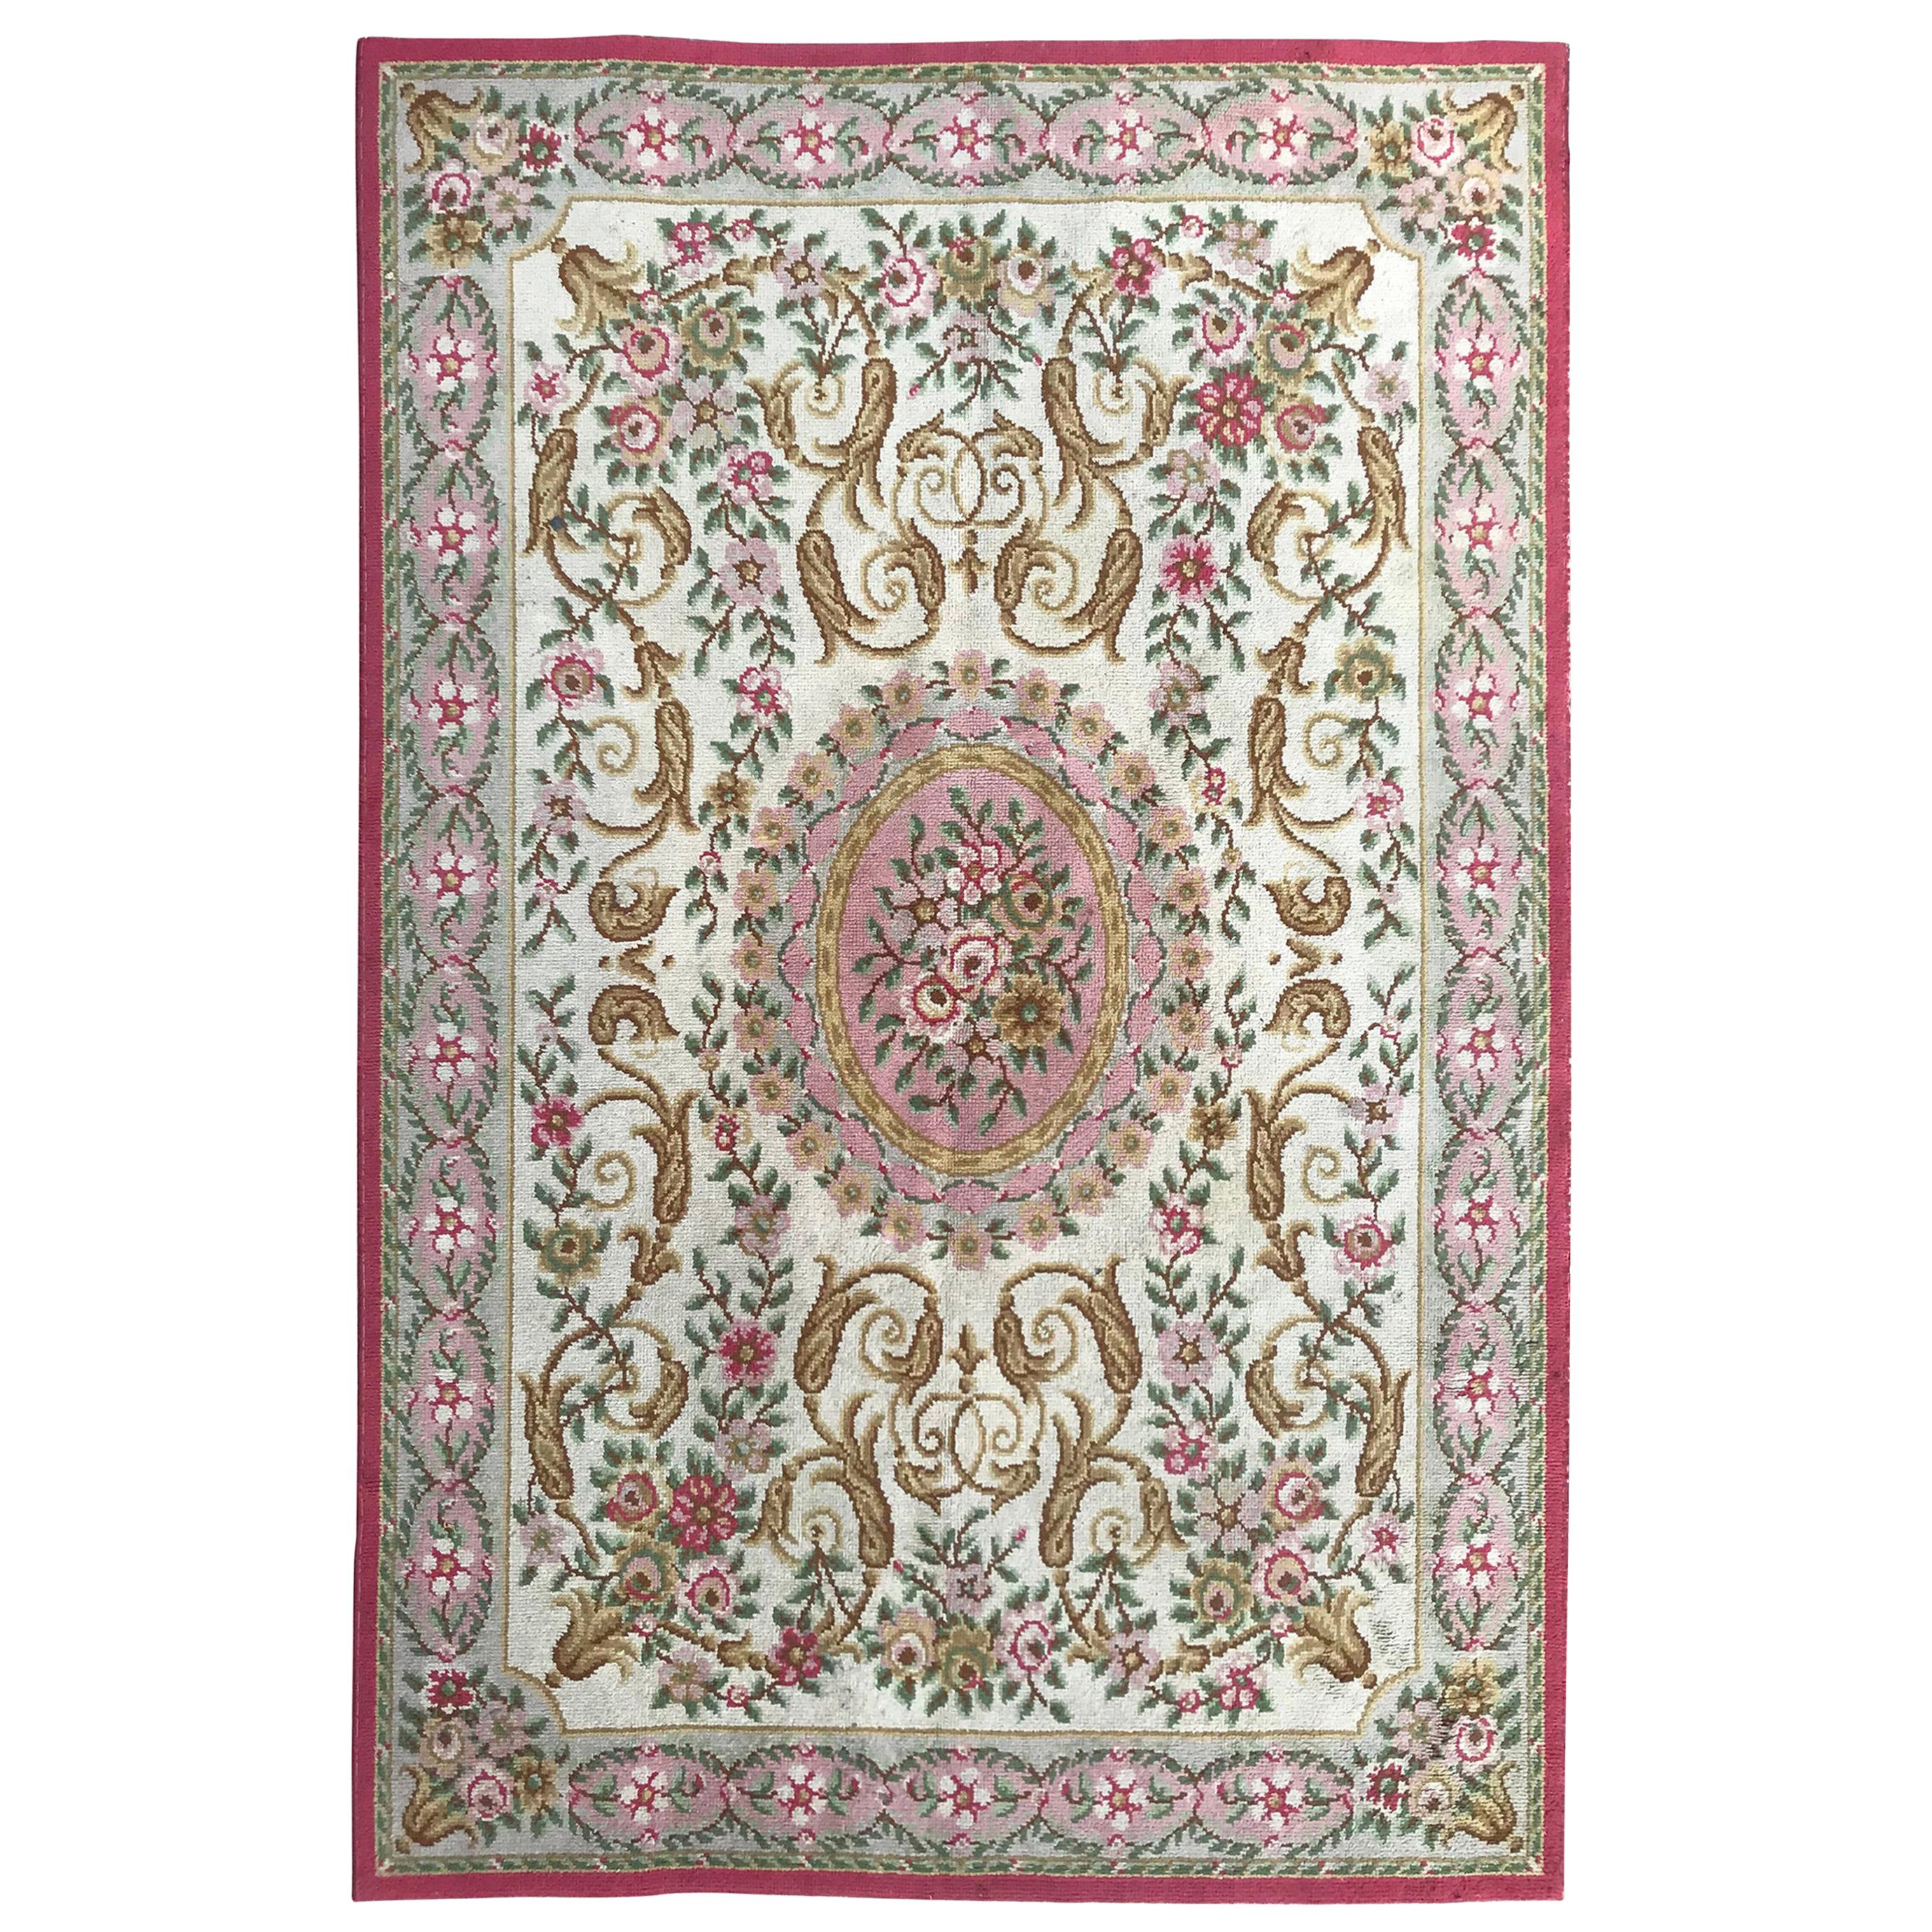 Nice Antique Knotted Aubusson Rug